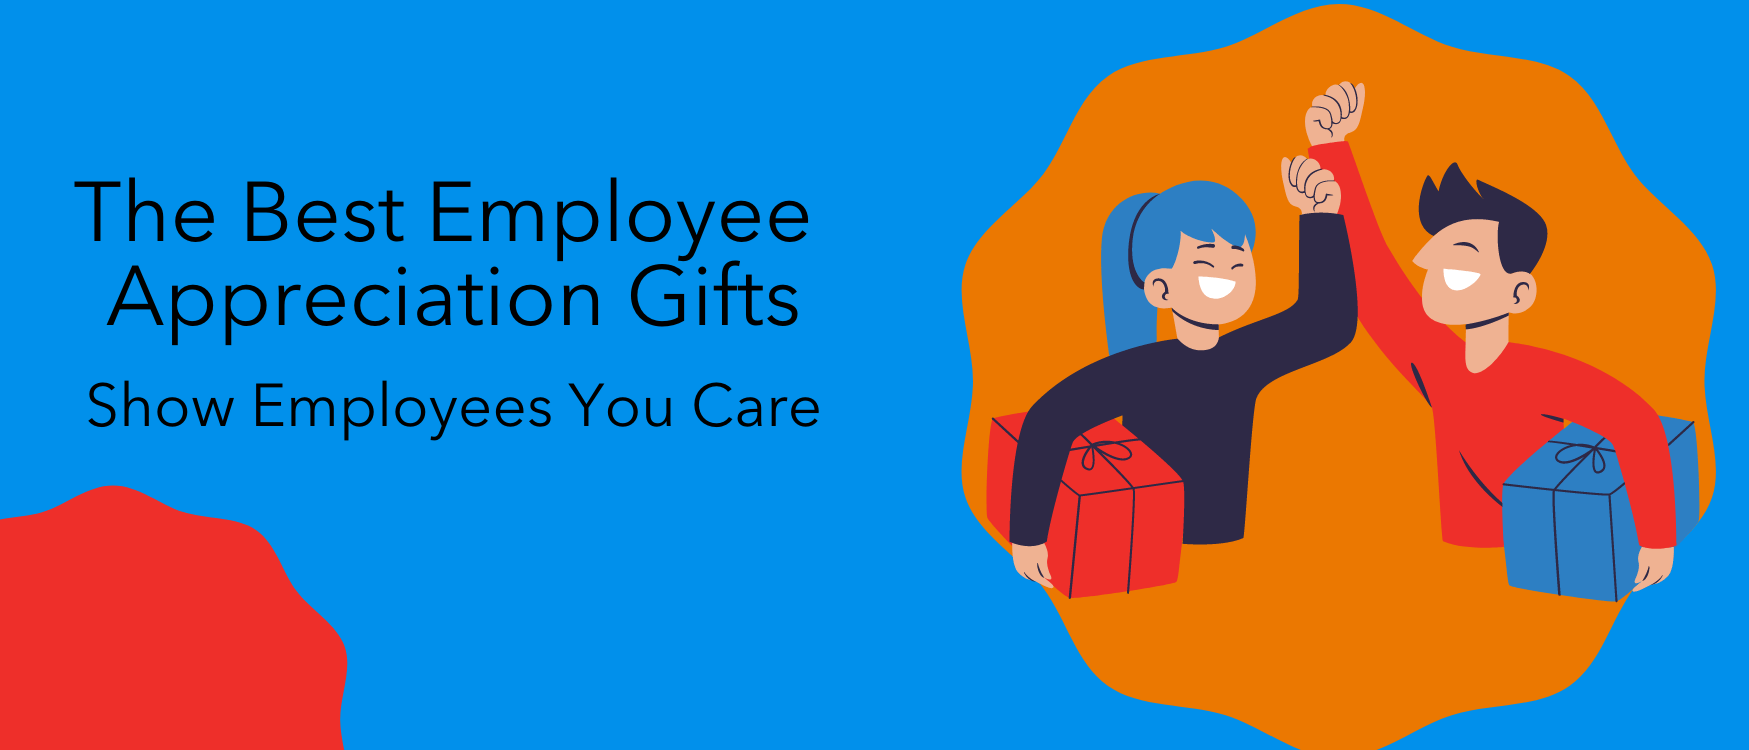 Employee Gifts - Recognition & Appreciation Gifts